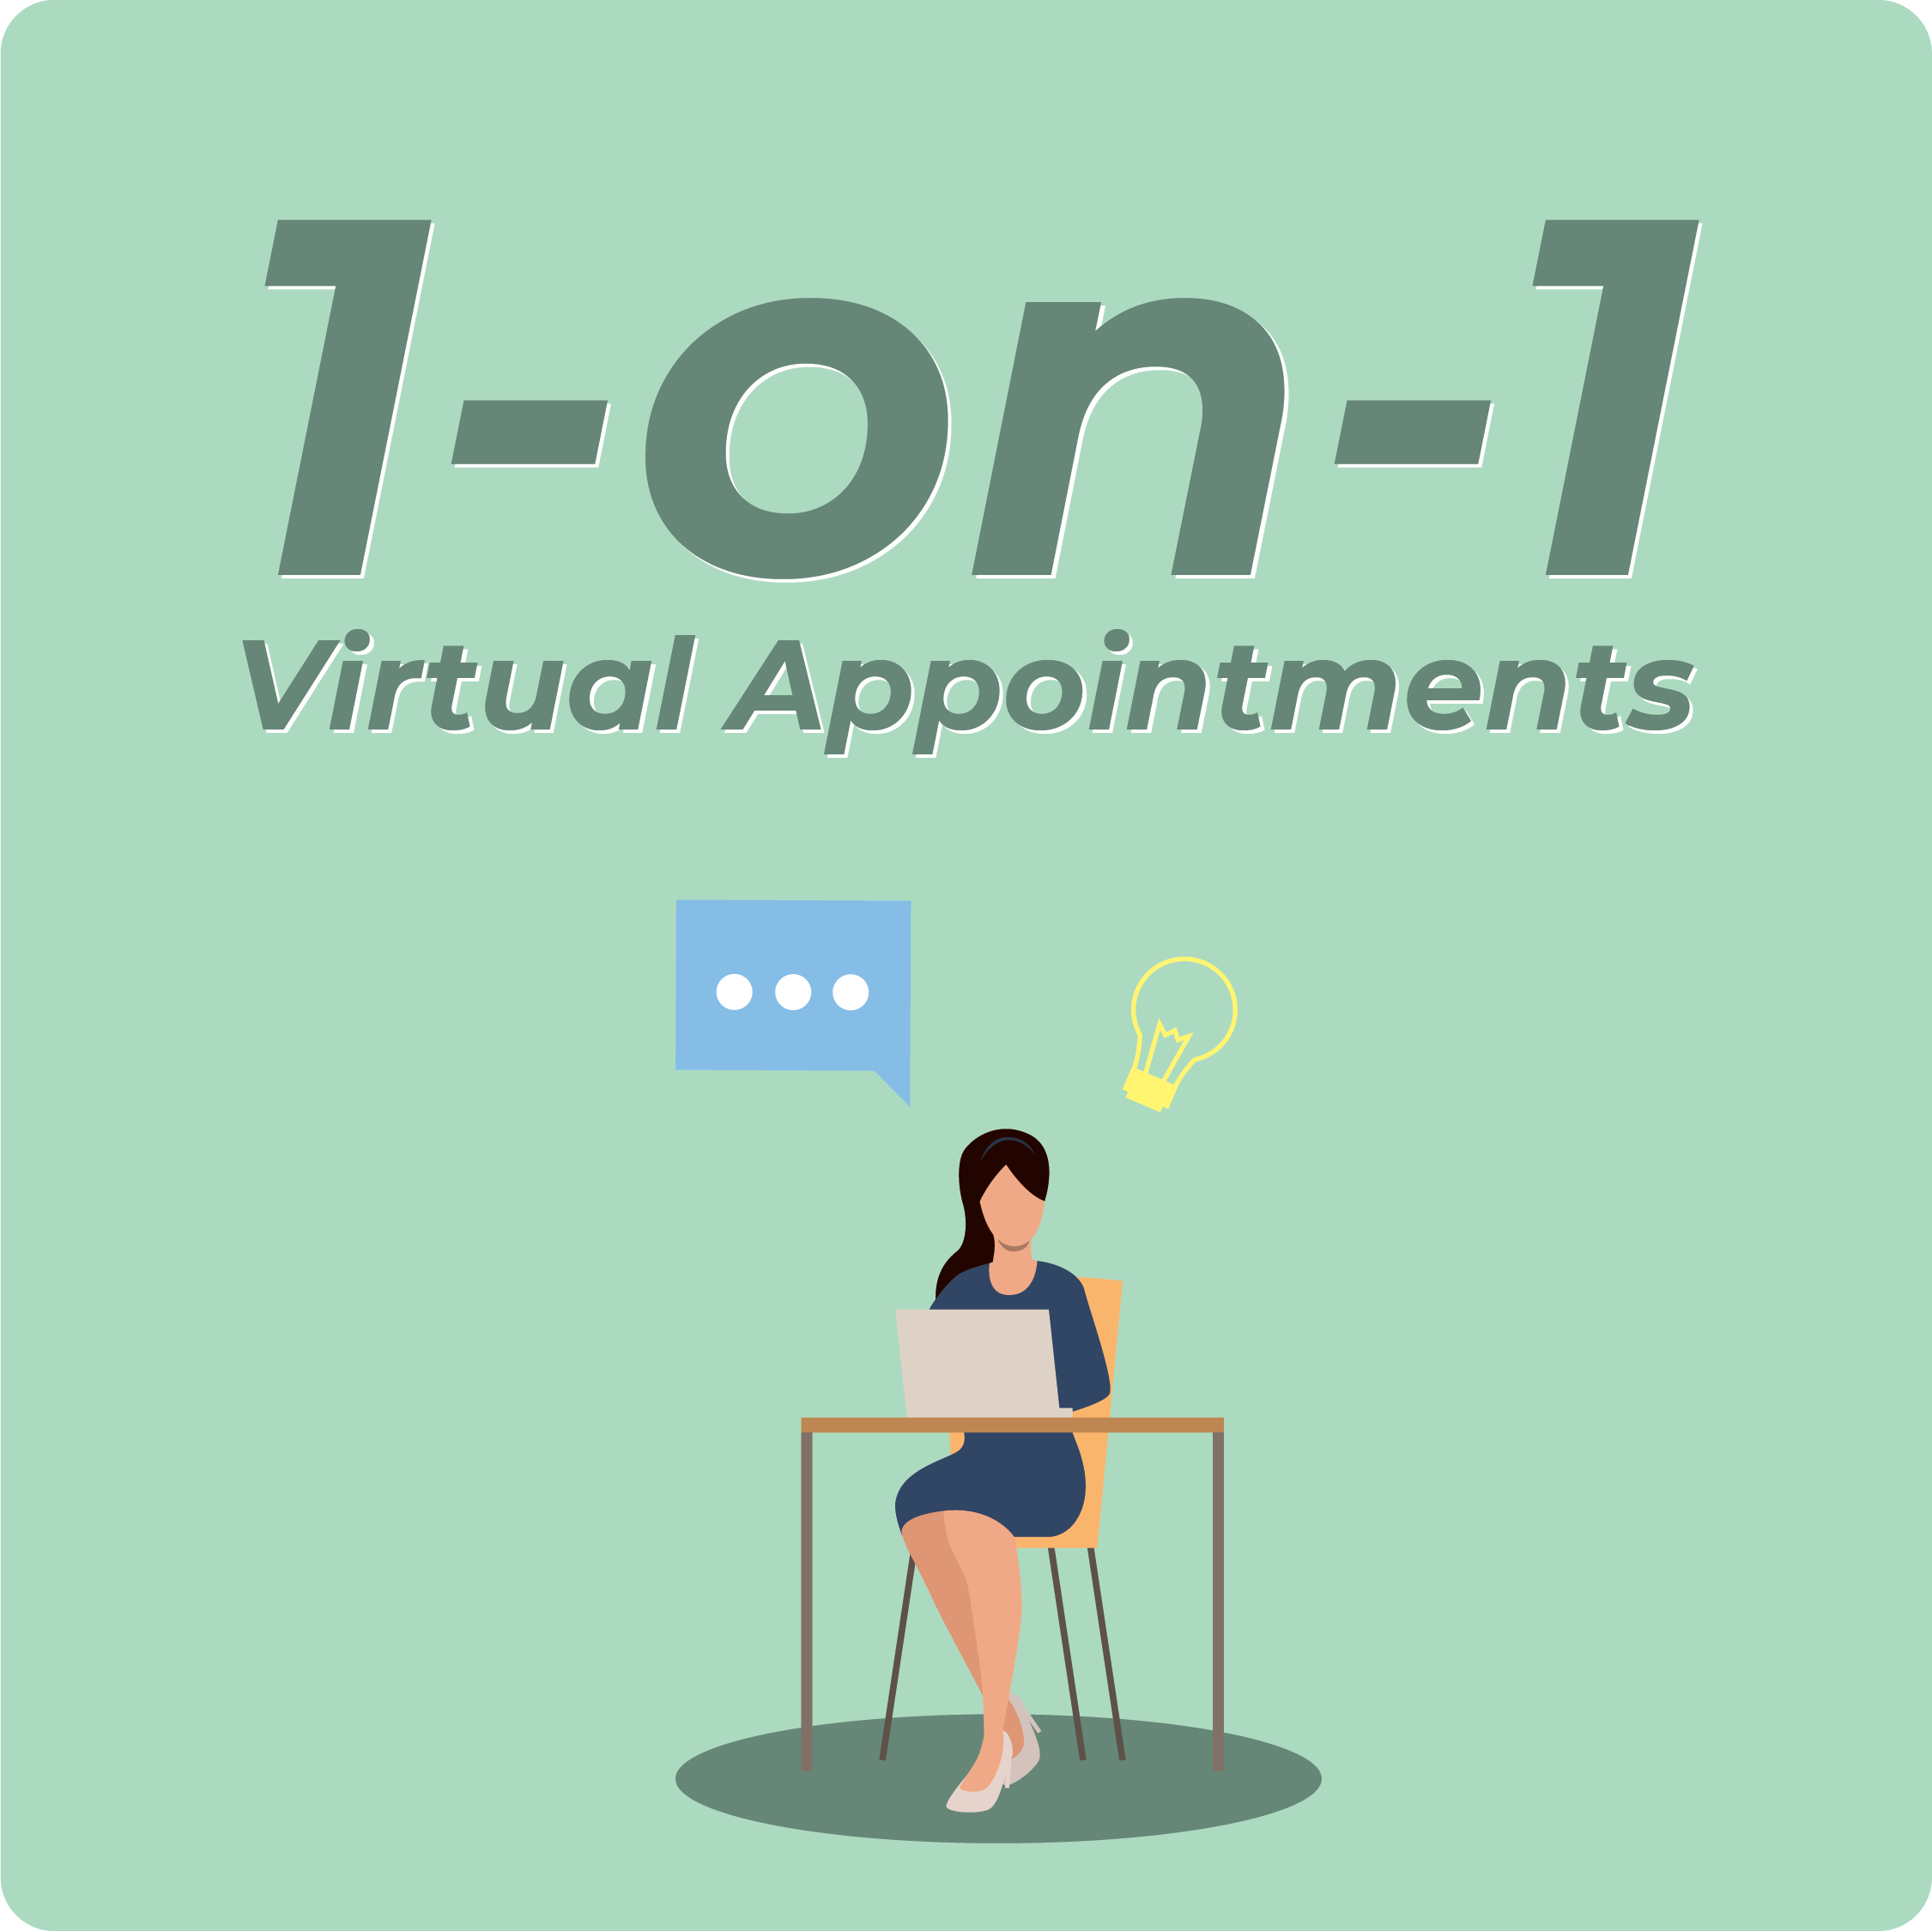 One-on-one appointments